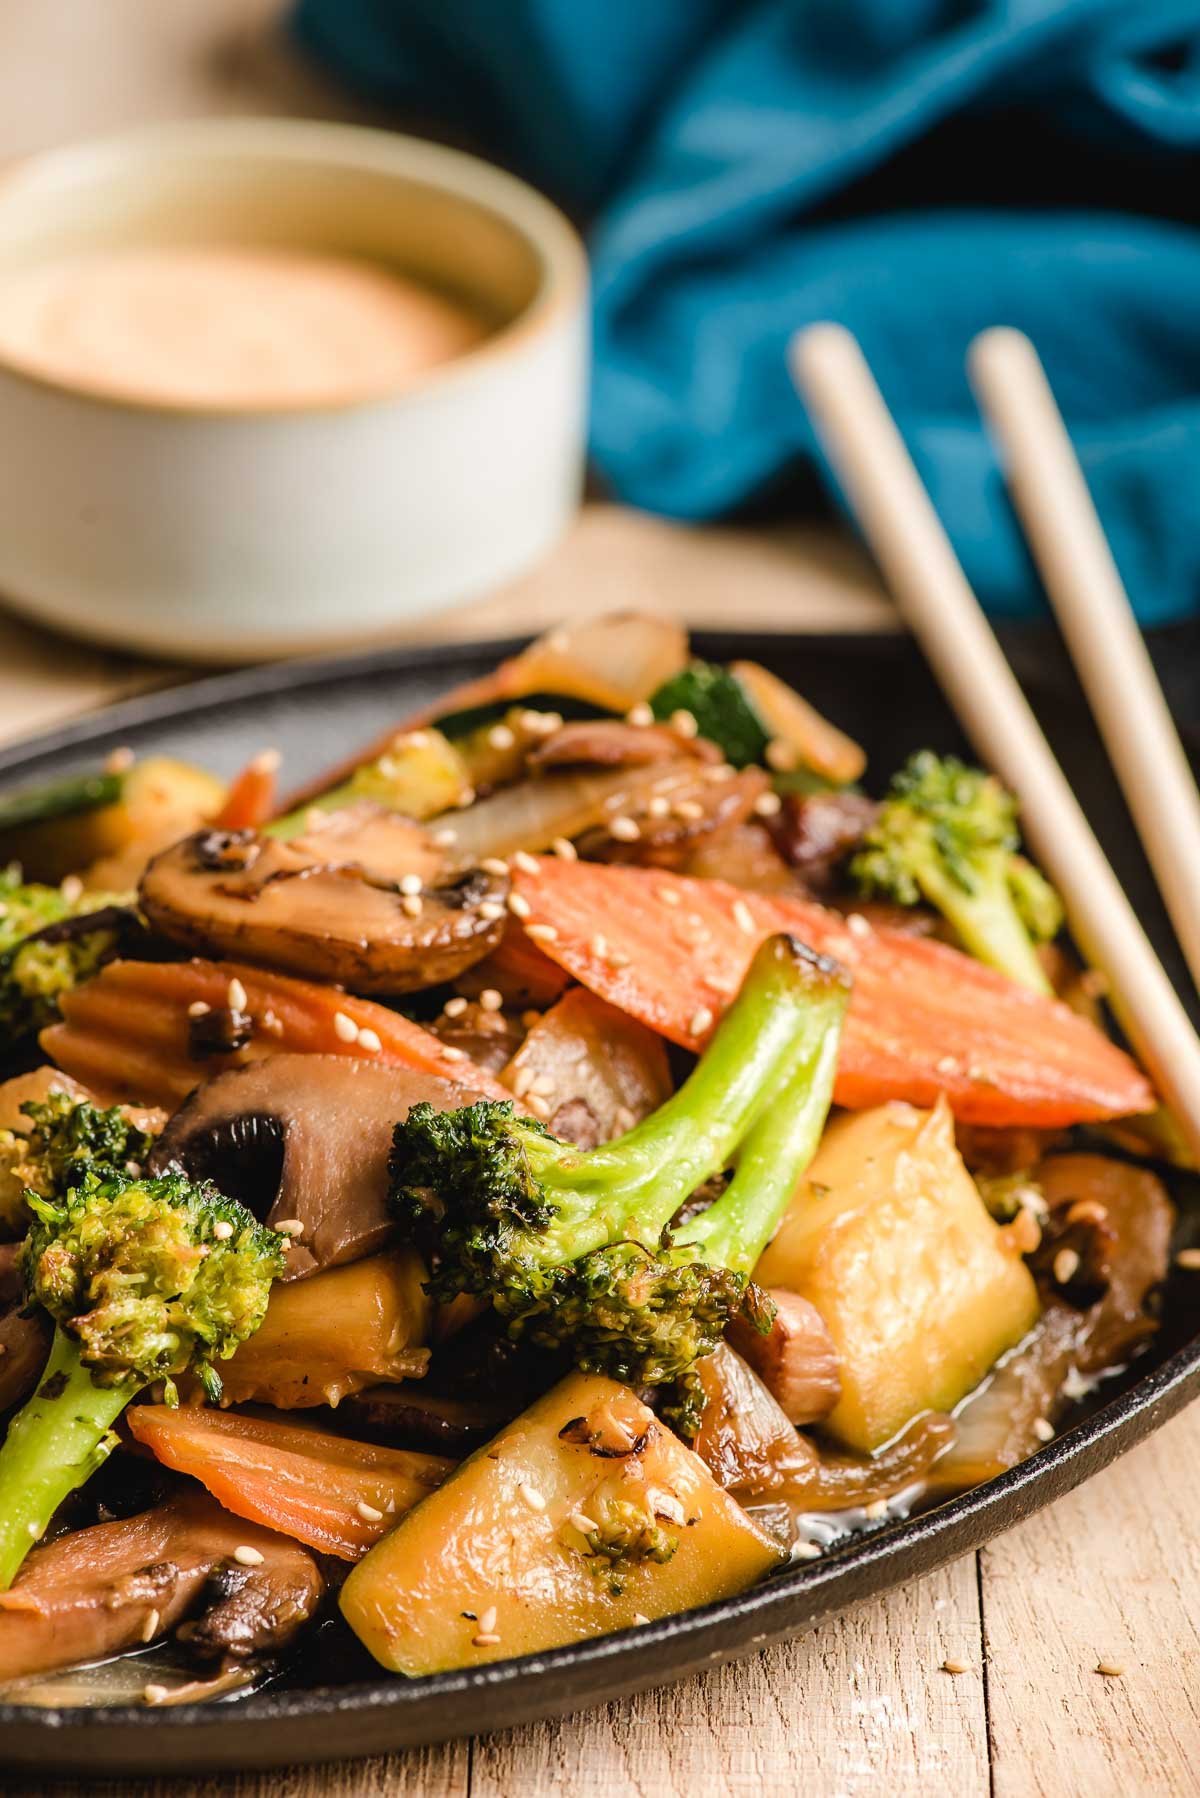 Hibachi vegetables on a plate with chopsticks.